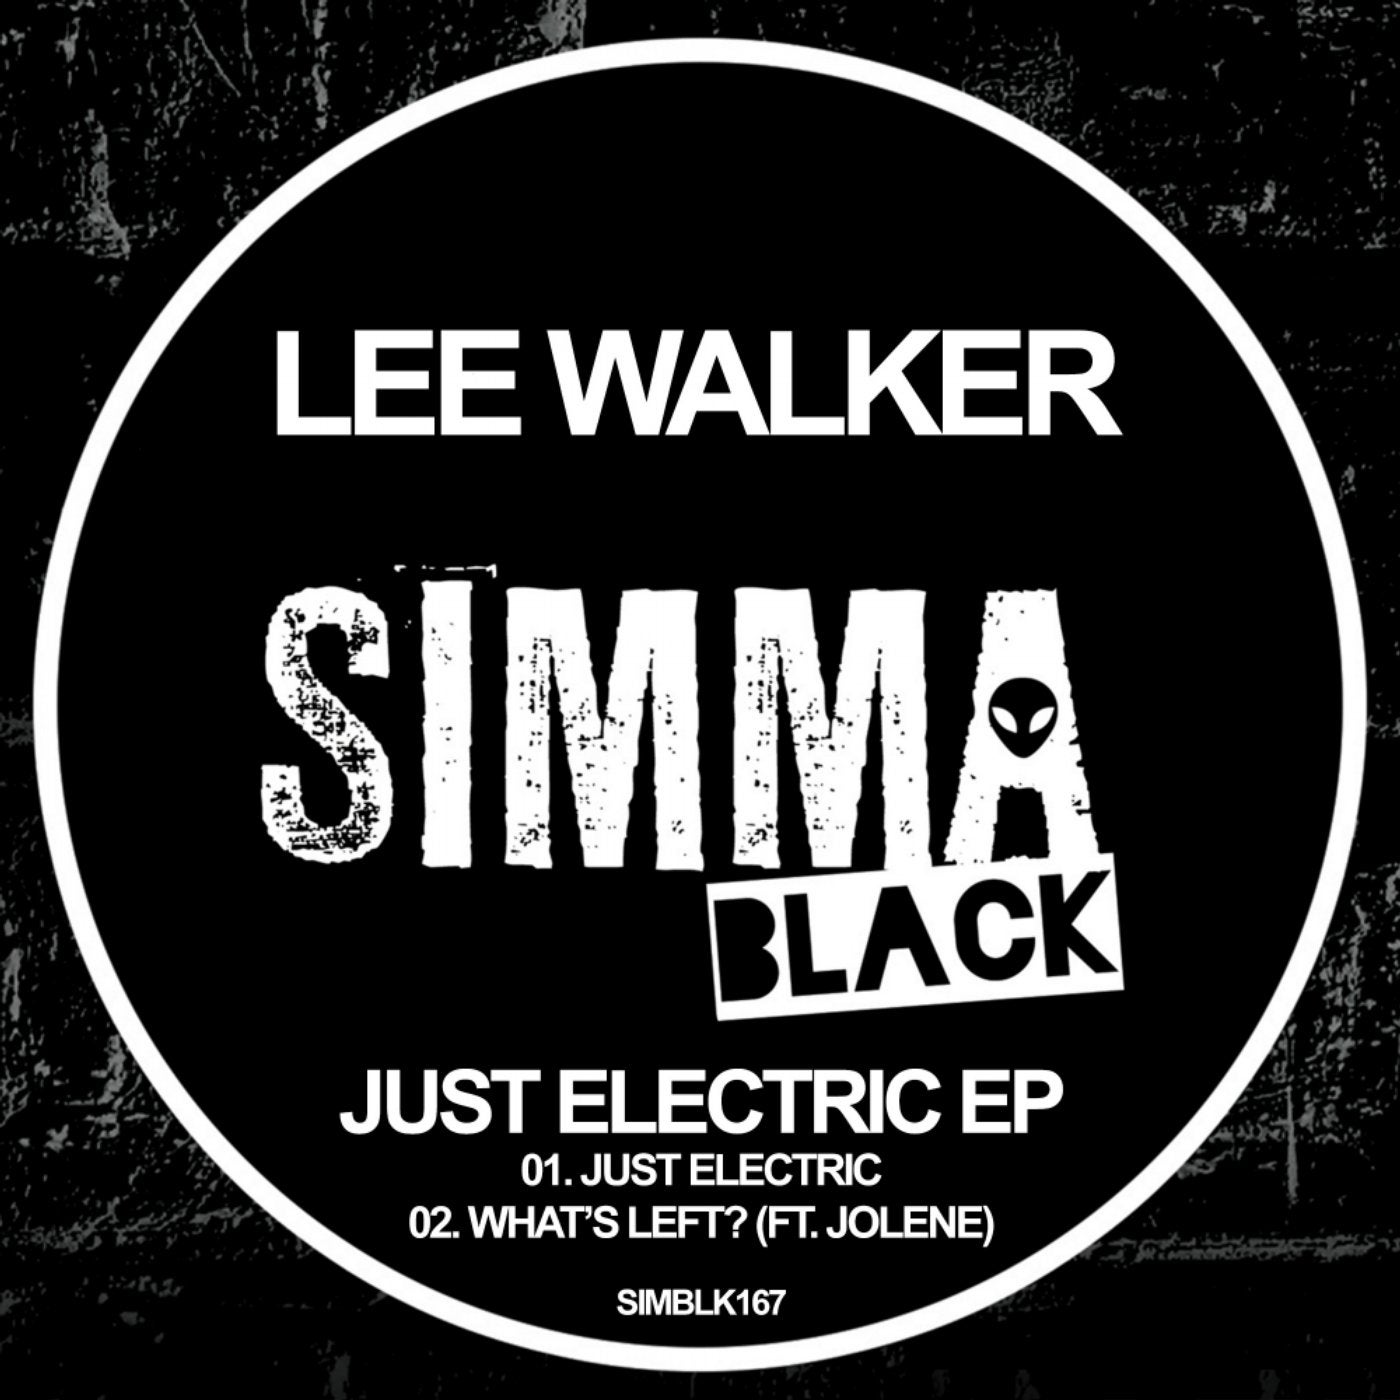 Just Electric EP